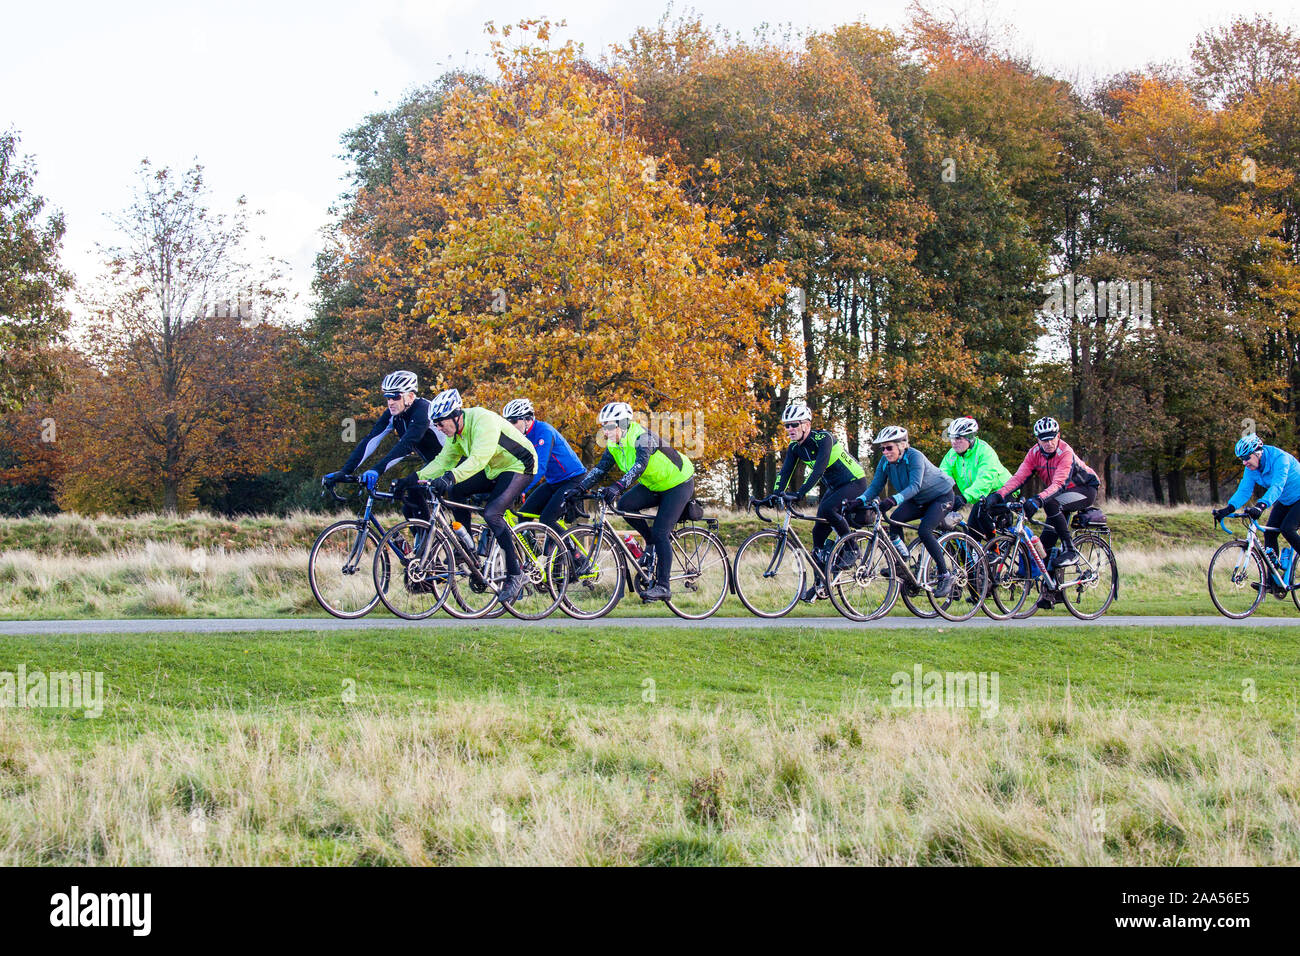 Cycling club riding  in the National trust  Tatton Park parkland Knutsford Cheshire England during Autumn Stock Photo